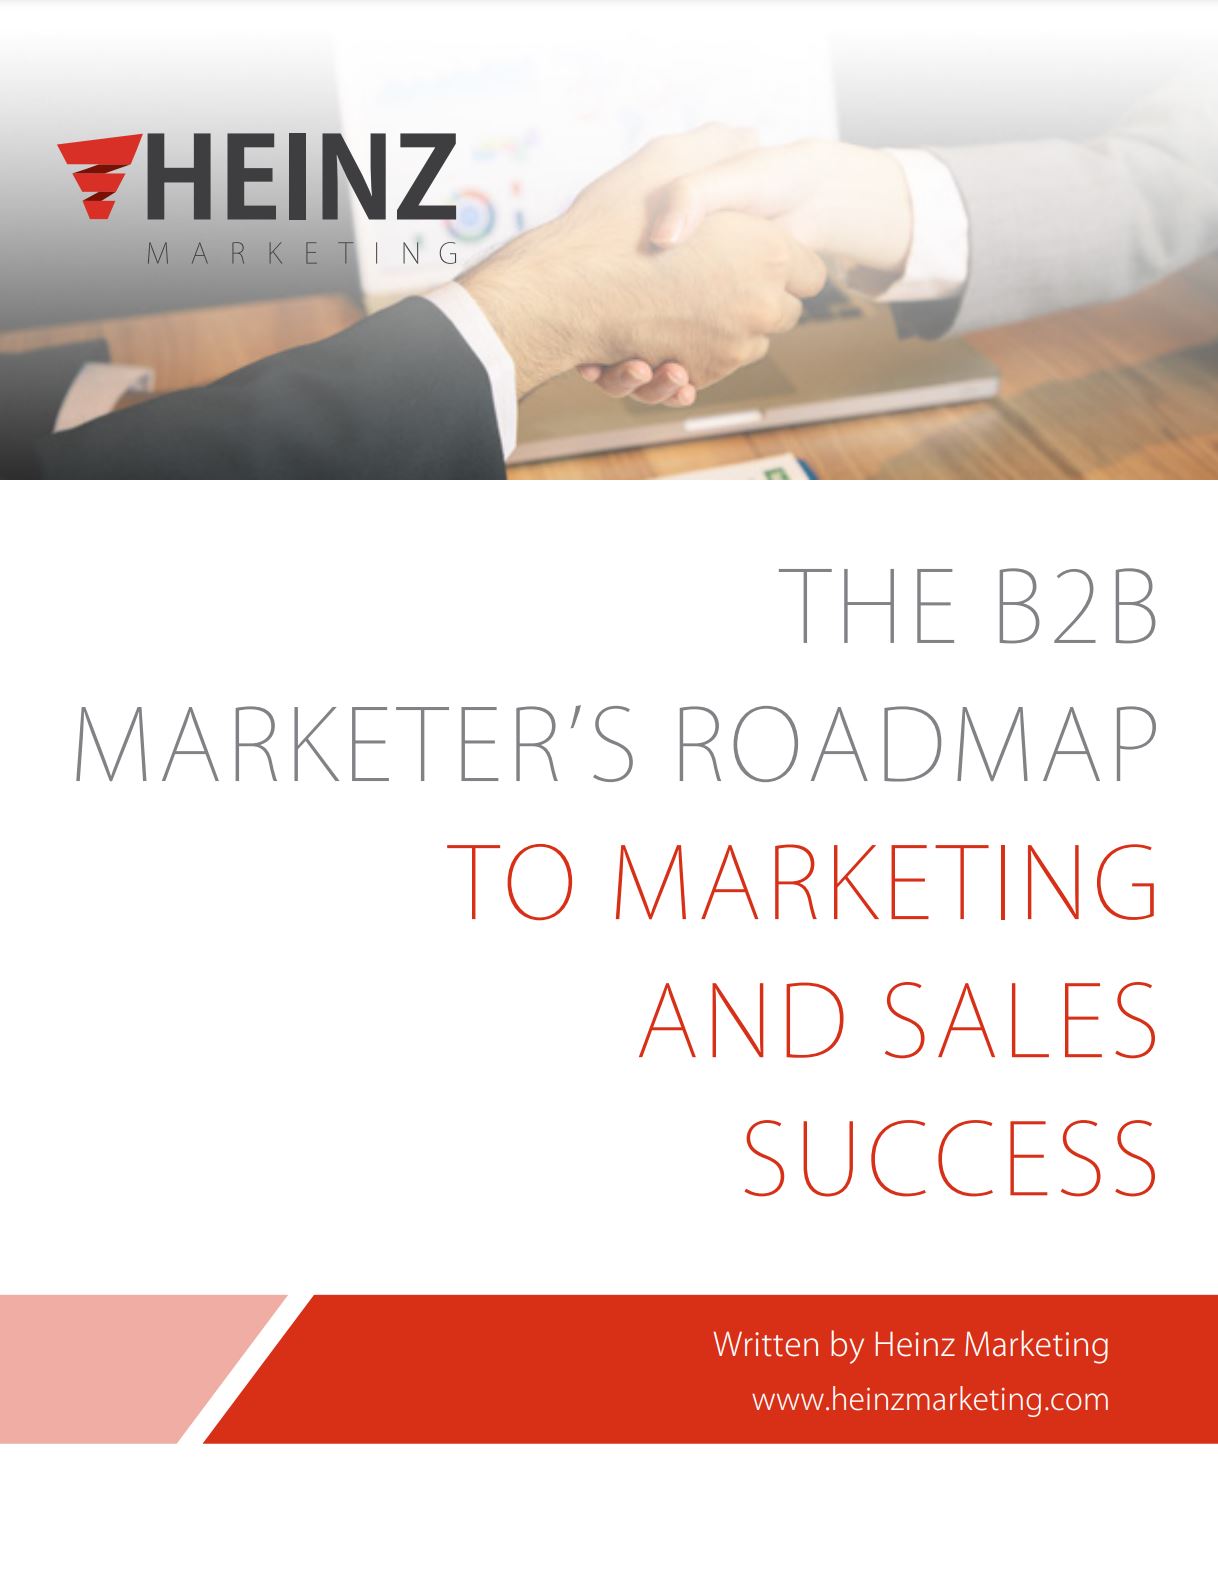 The B2B Marketer’s Roadmap to Marketing and Sales Success